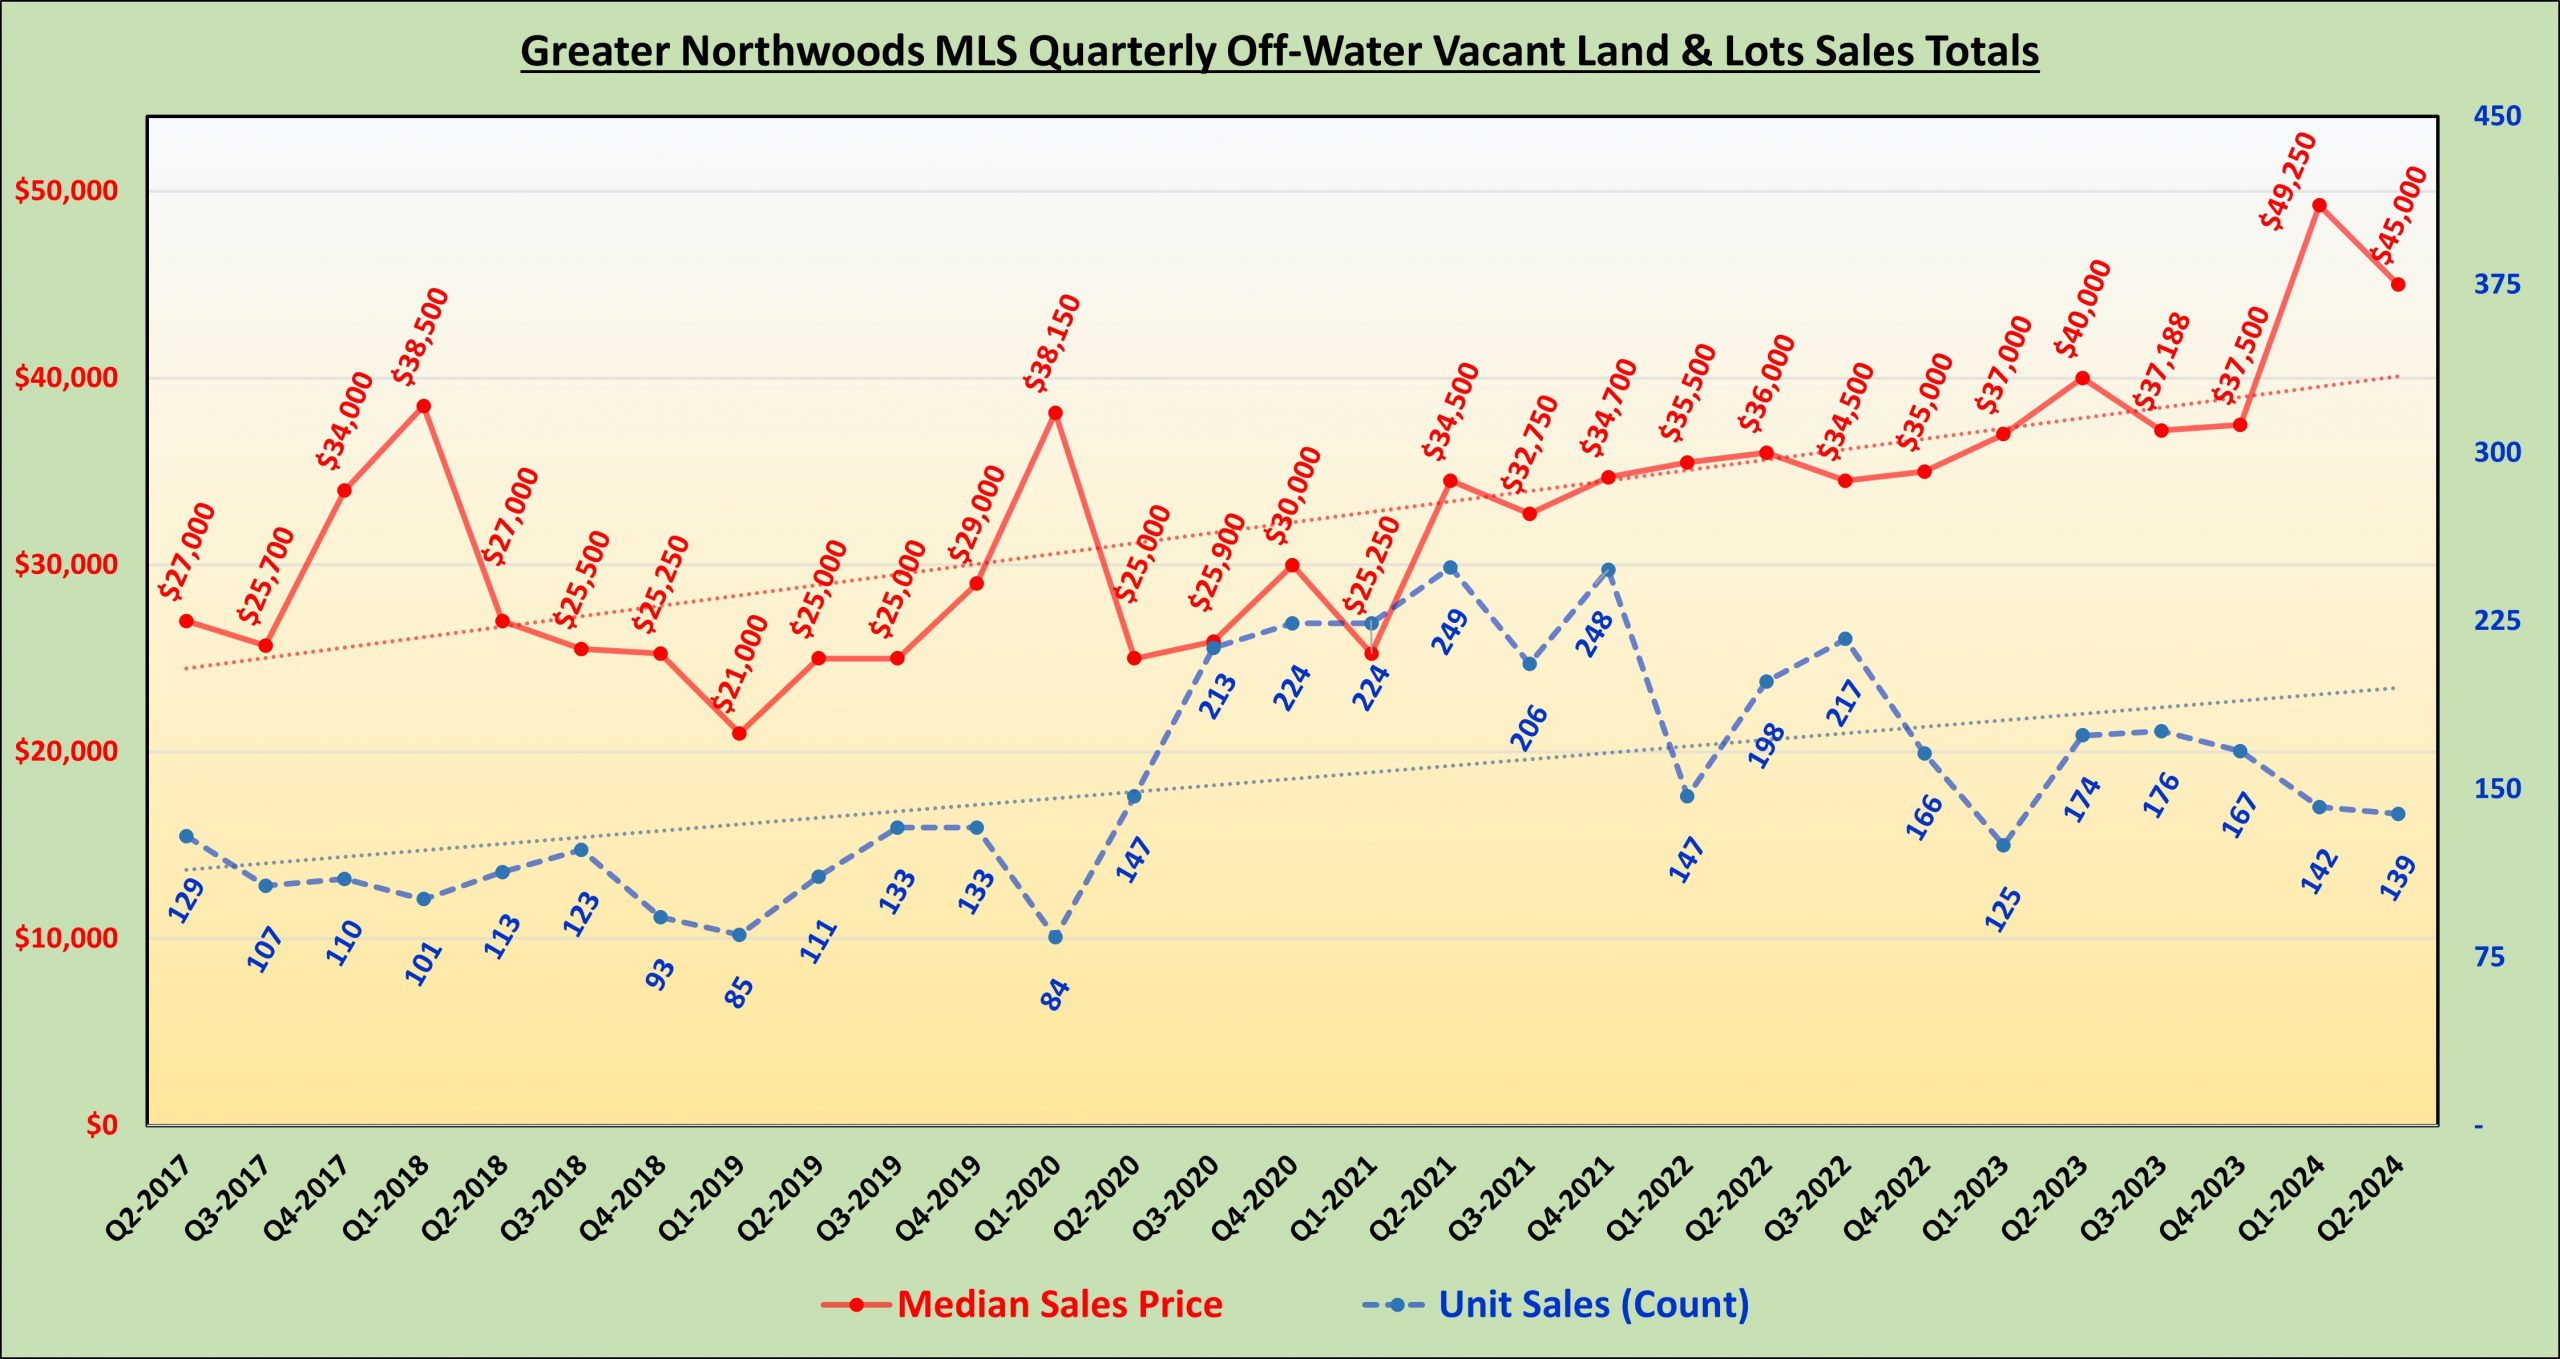 GNMLS_OffWater_Land_Totals